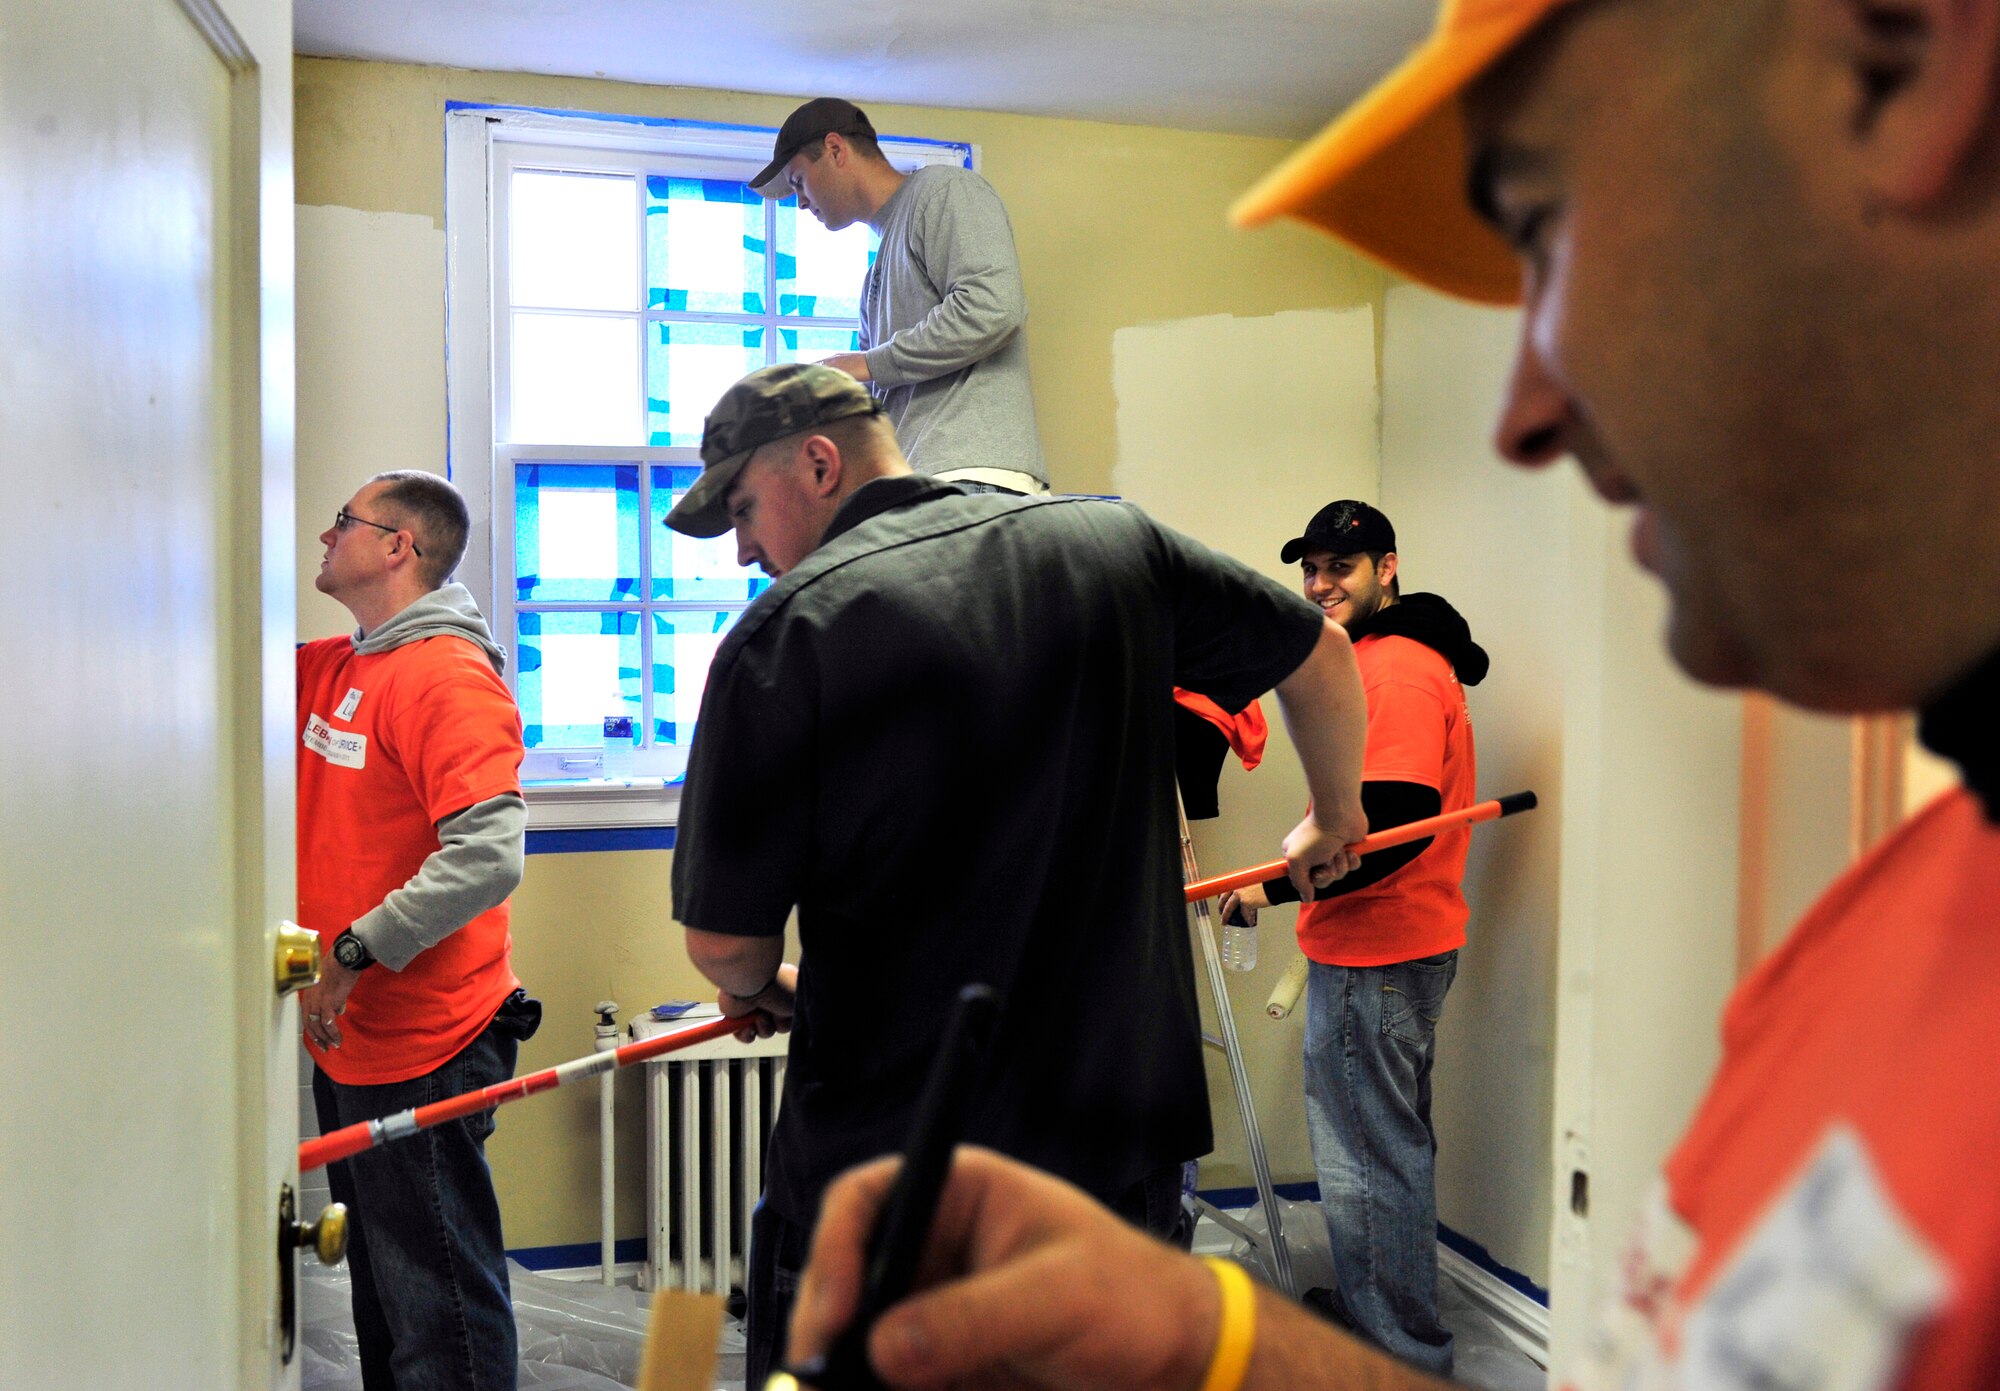 Members assigned to Scott Air Force Base paint an entire room from top to bottom in a donated house Oct. 27 during the Celebration of Service campaign event in Saint Louis, Mo. More than 350 volunteers rehabilitated a donated church building into a technology training and resource center for veterans allowing them a place to transition from military into civilian life.  The new facility will provide veterans with instruction and skills training to preparing them for employment The campaign launched by Home Depot and the Mission Continues, was created to enhance the lives of U.S. military veterans and to highlight the needs and opportunities they face. (U.S. Air Force photo/ Staff Sgt. Stephenie Wade)